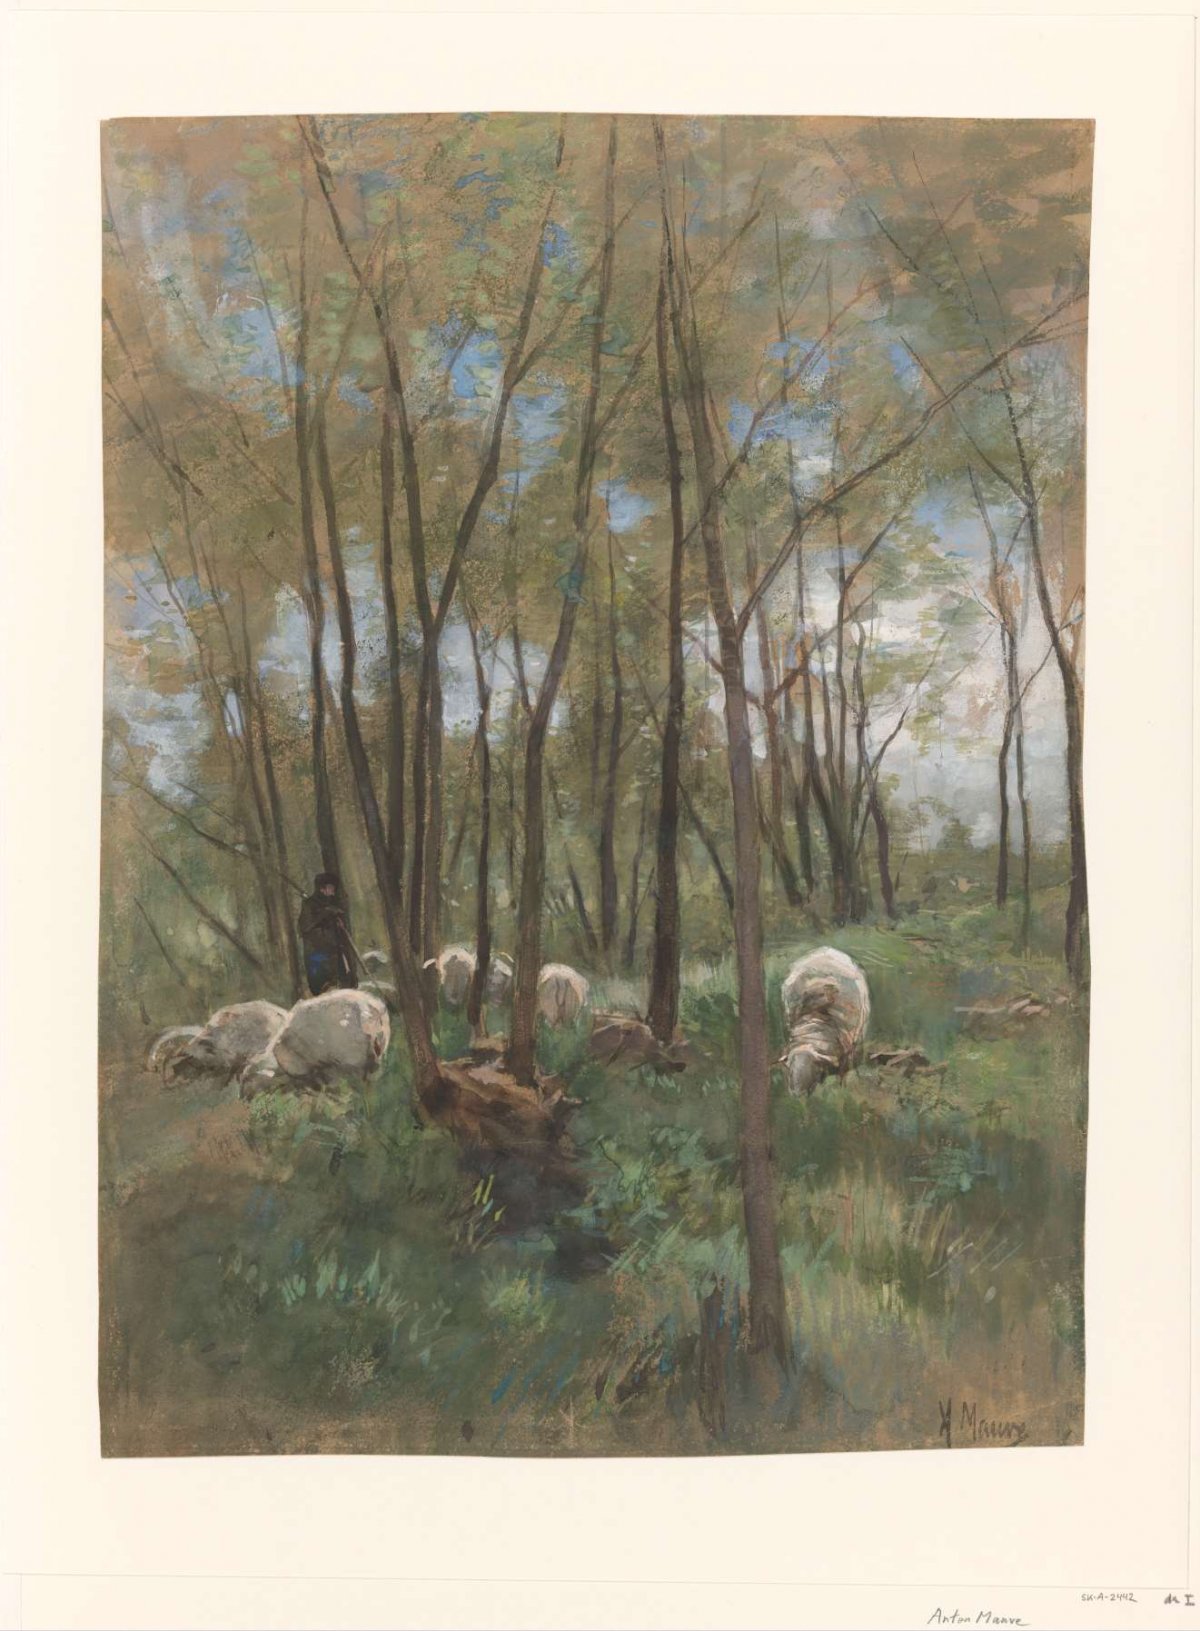 Sheep herd in a forest, Anton Mauve, 1848 - 1888